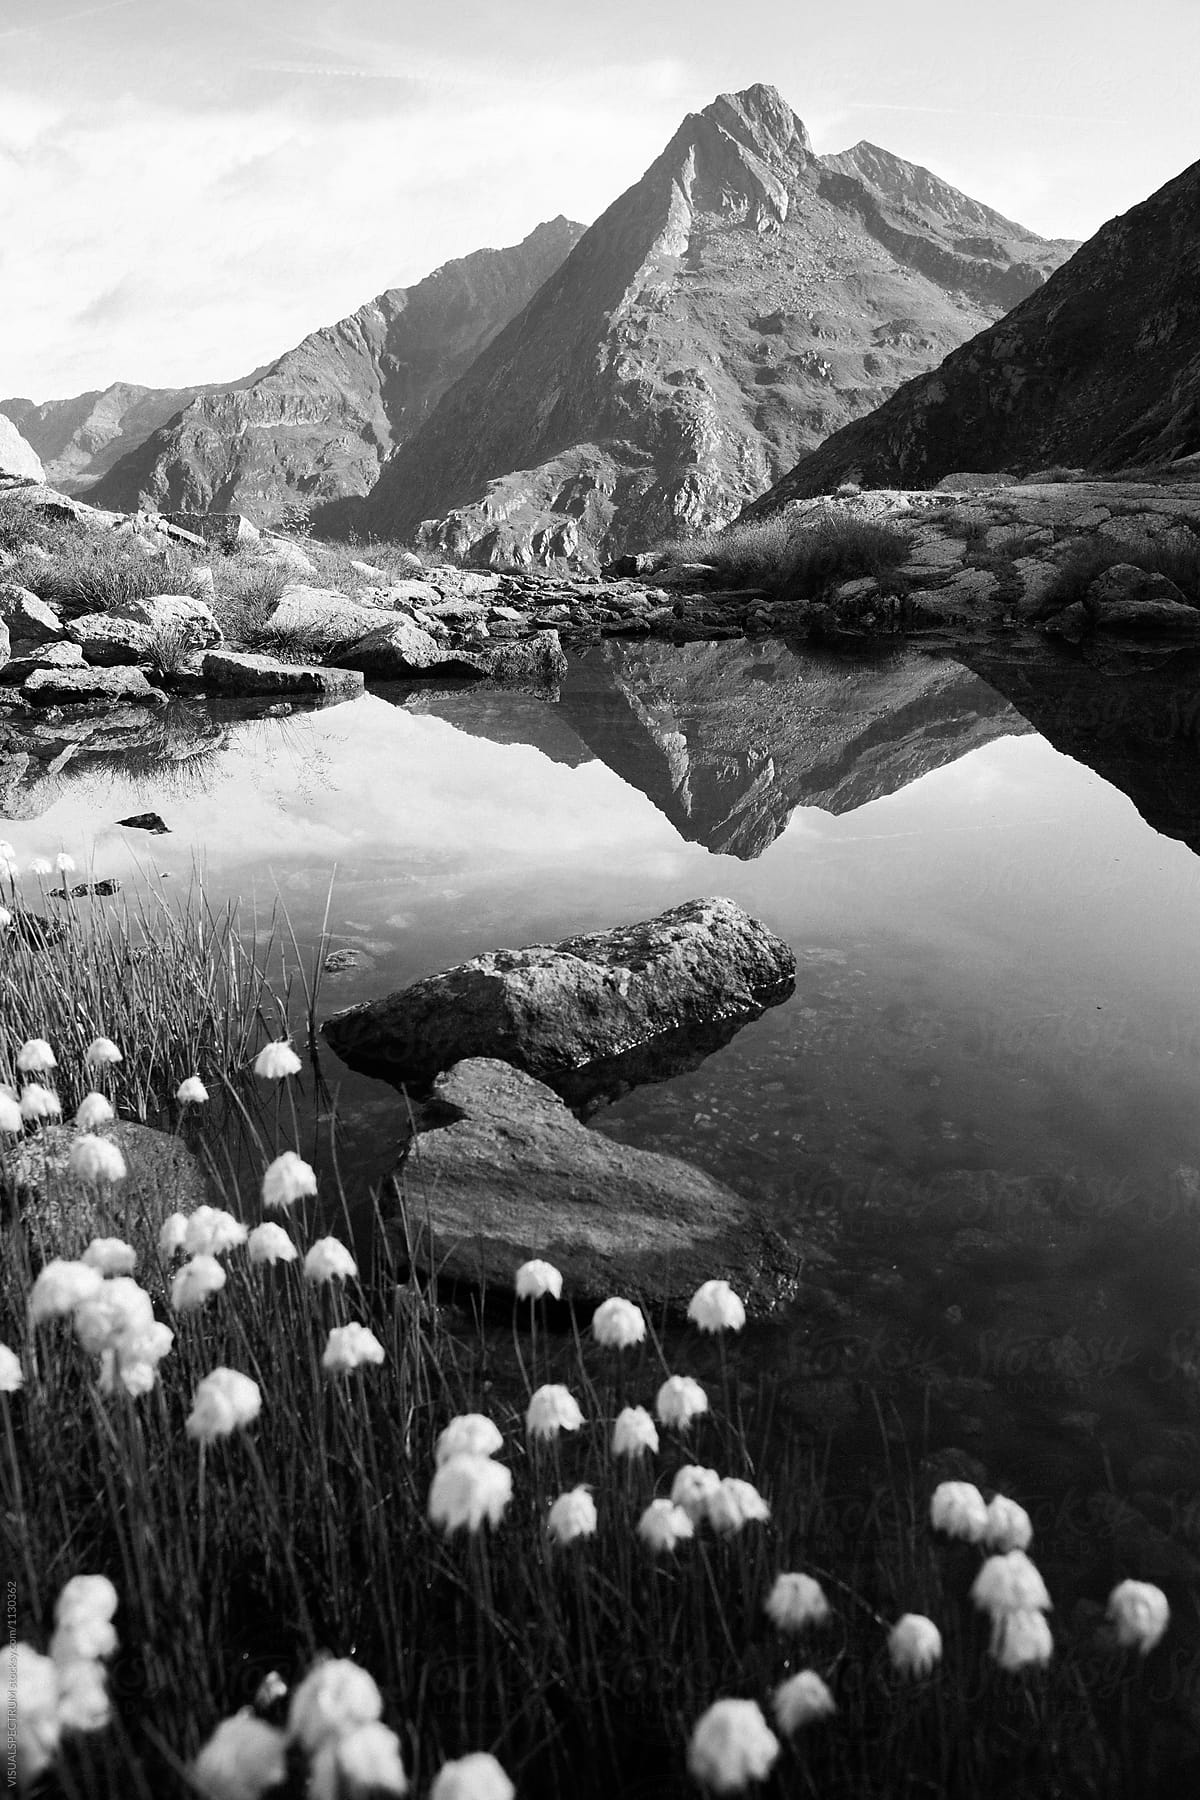 Black and White Shot of Swiss Alpine Mountain Peak and Its Reflection